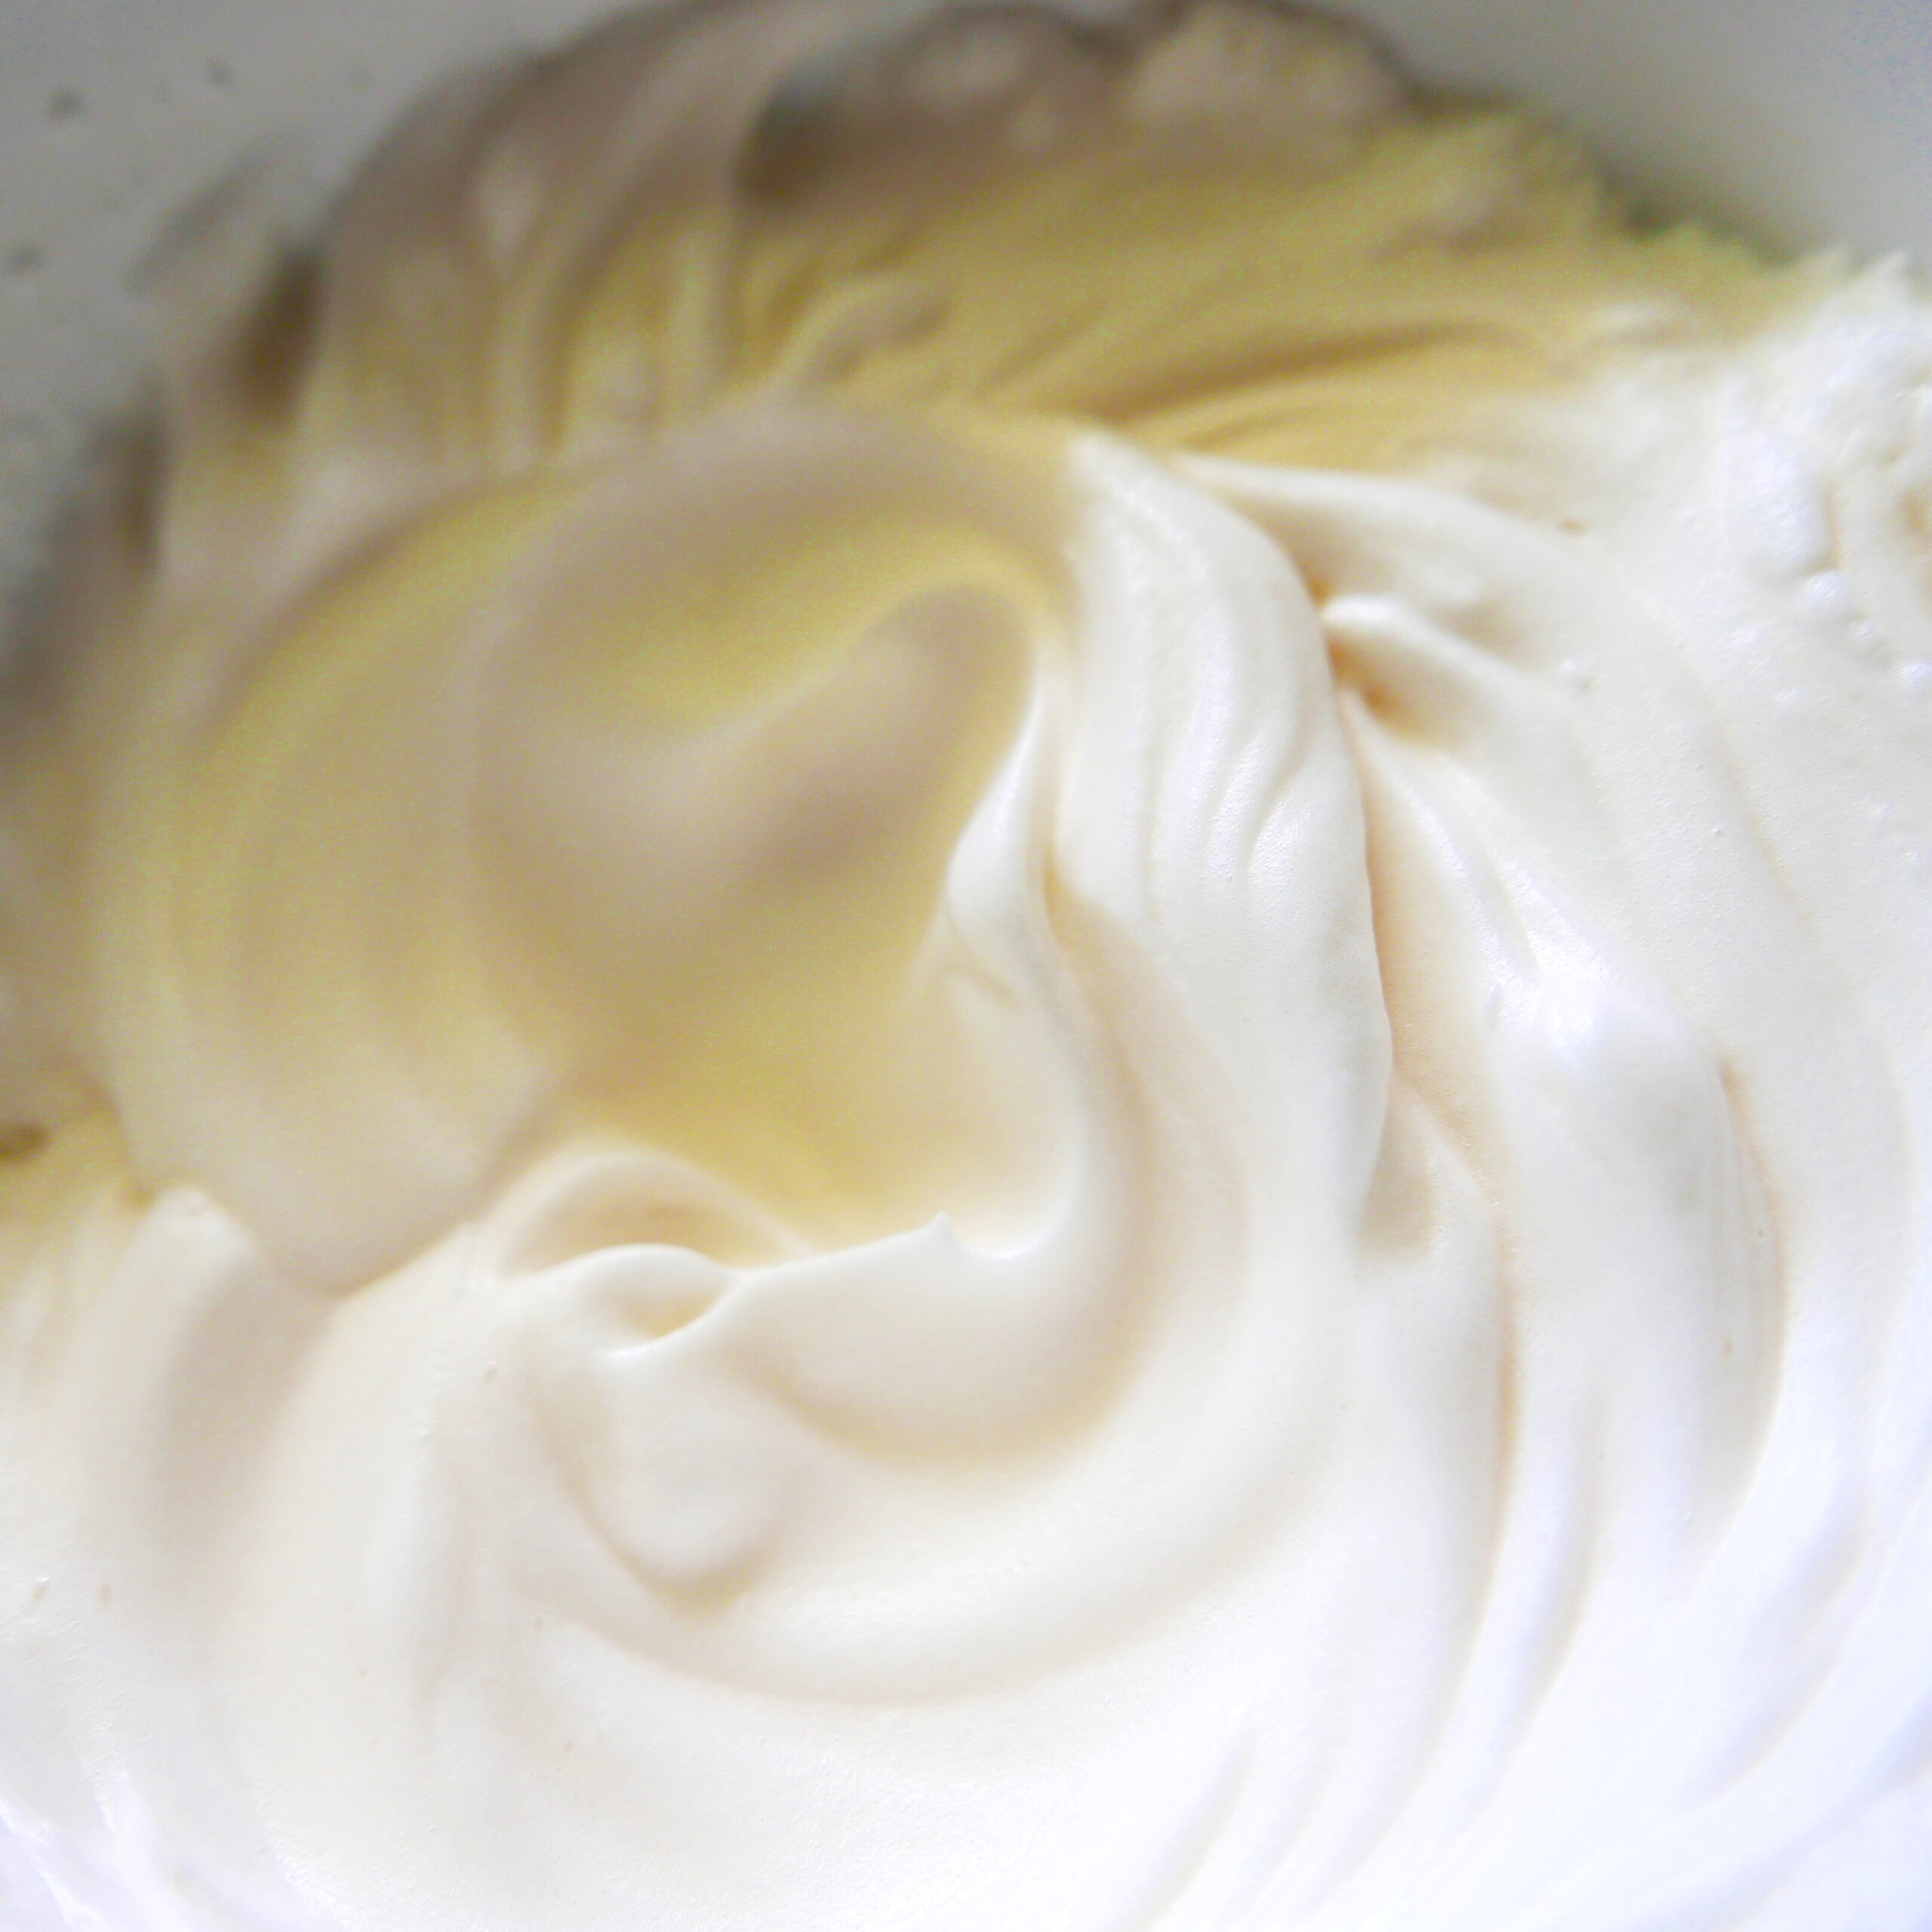 egg white meringue in a mixing bowl.